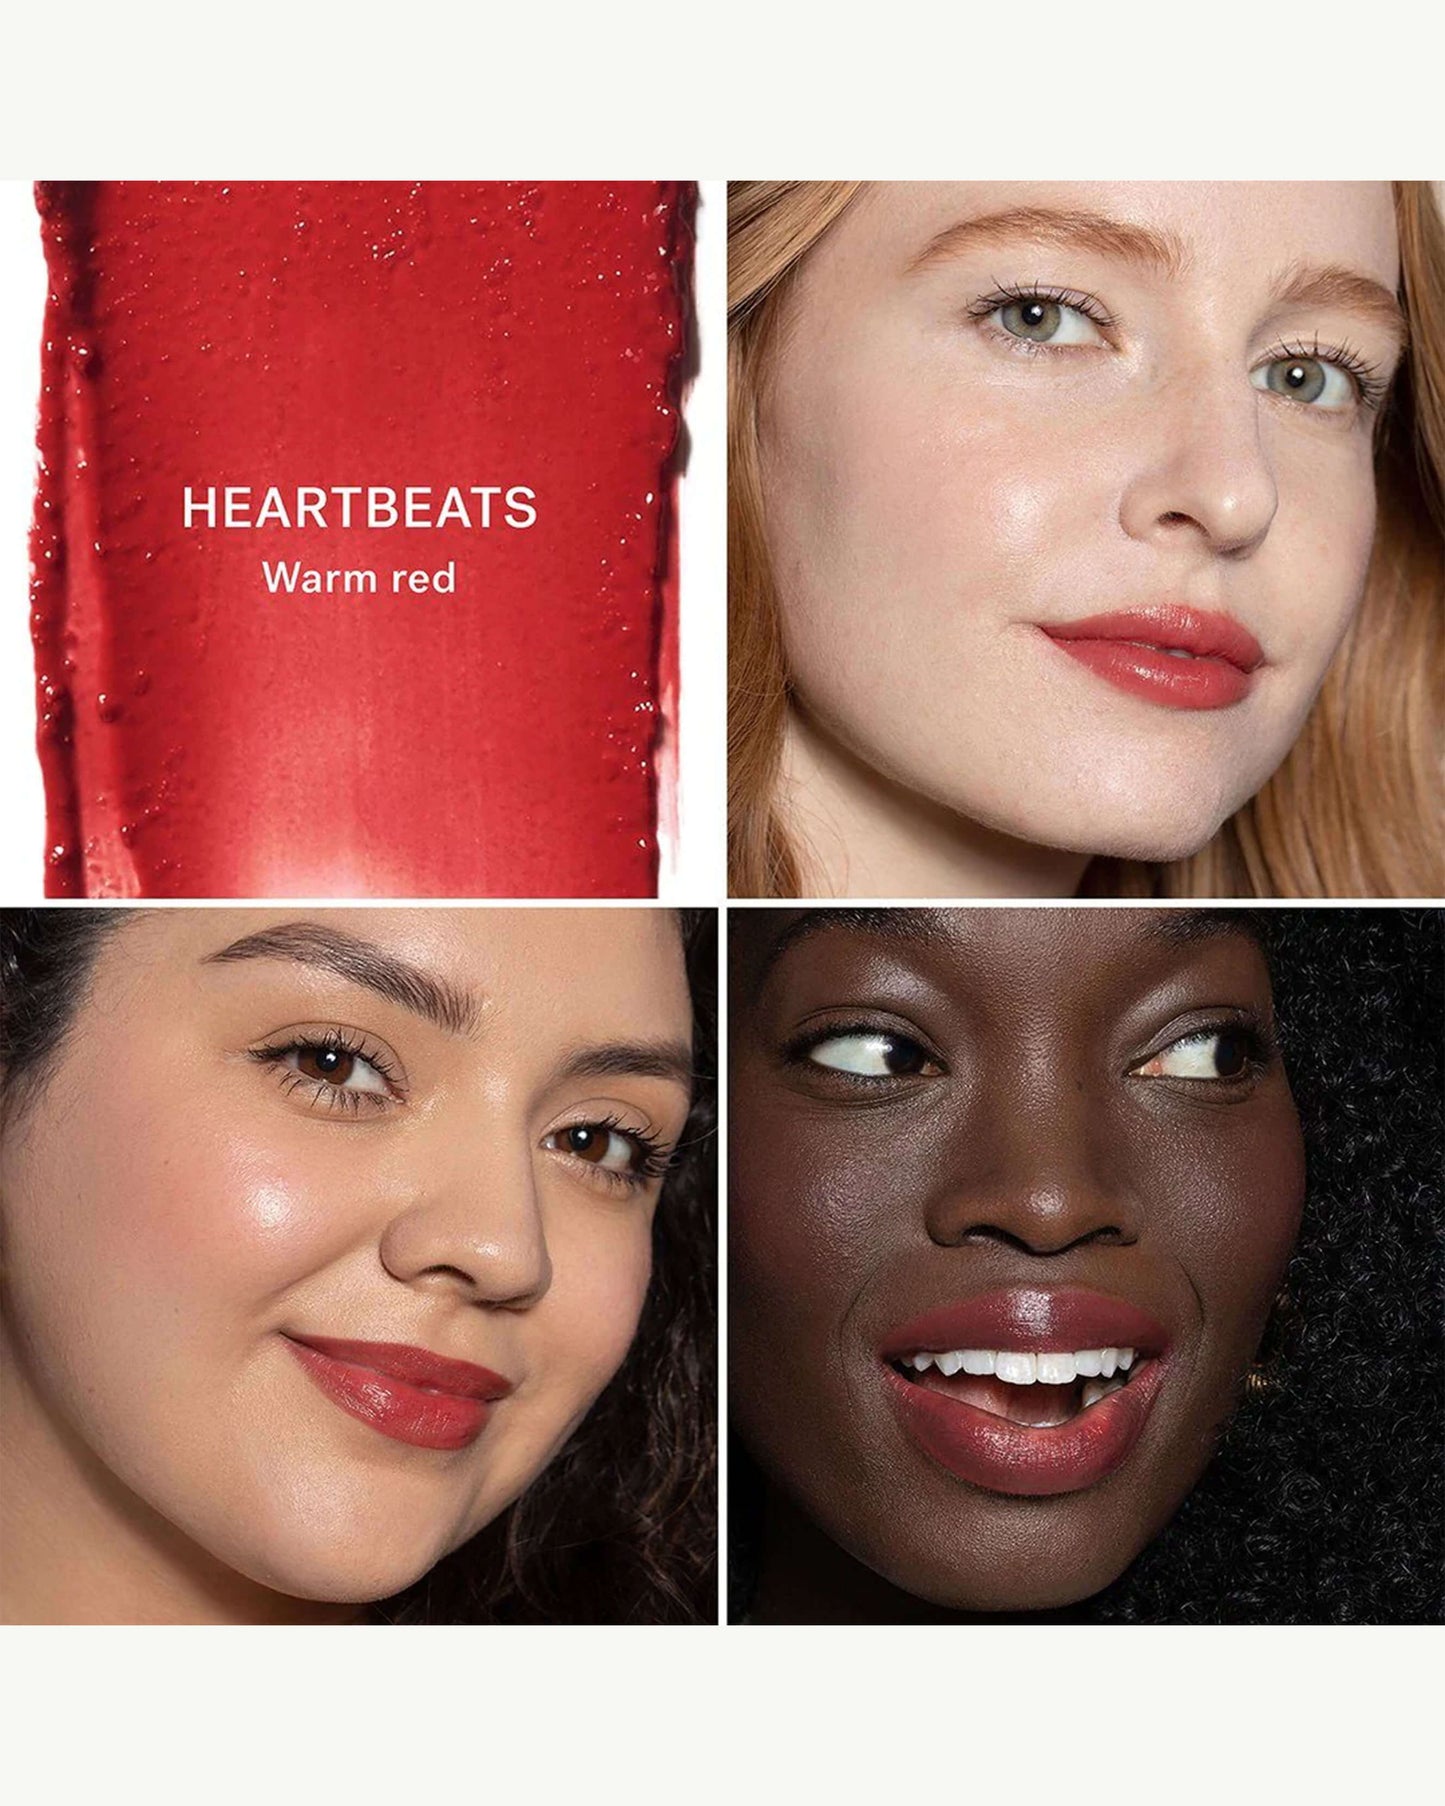 Heartbeats (red with warm undertones)